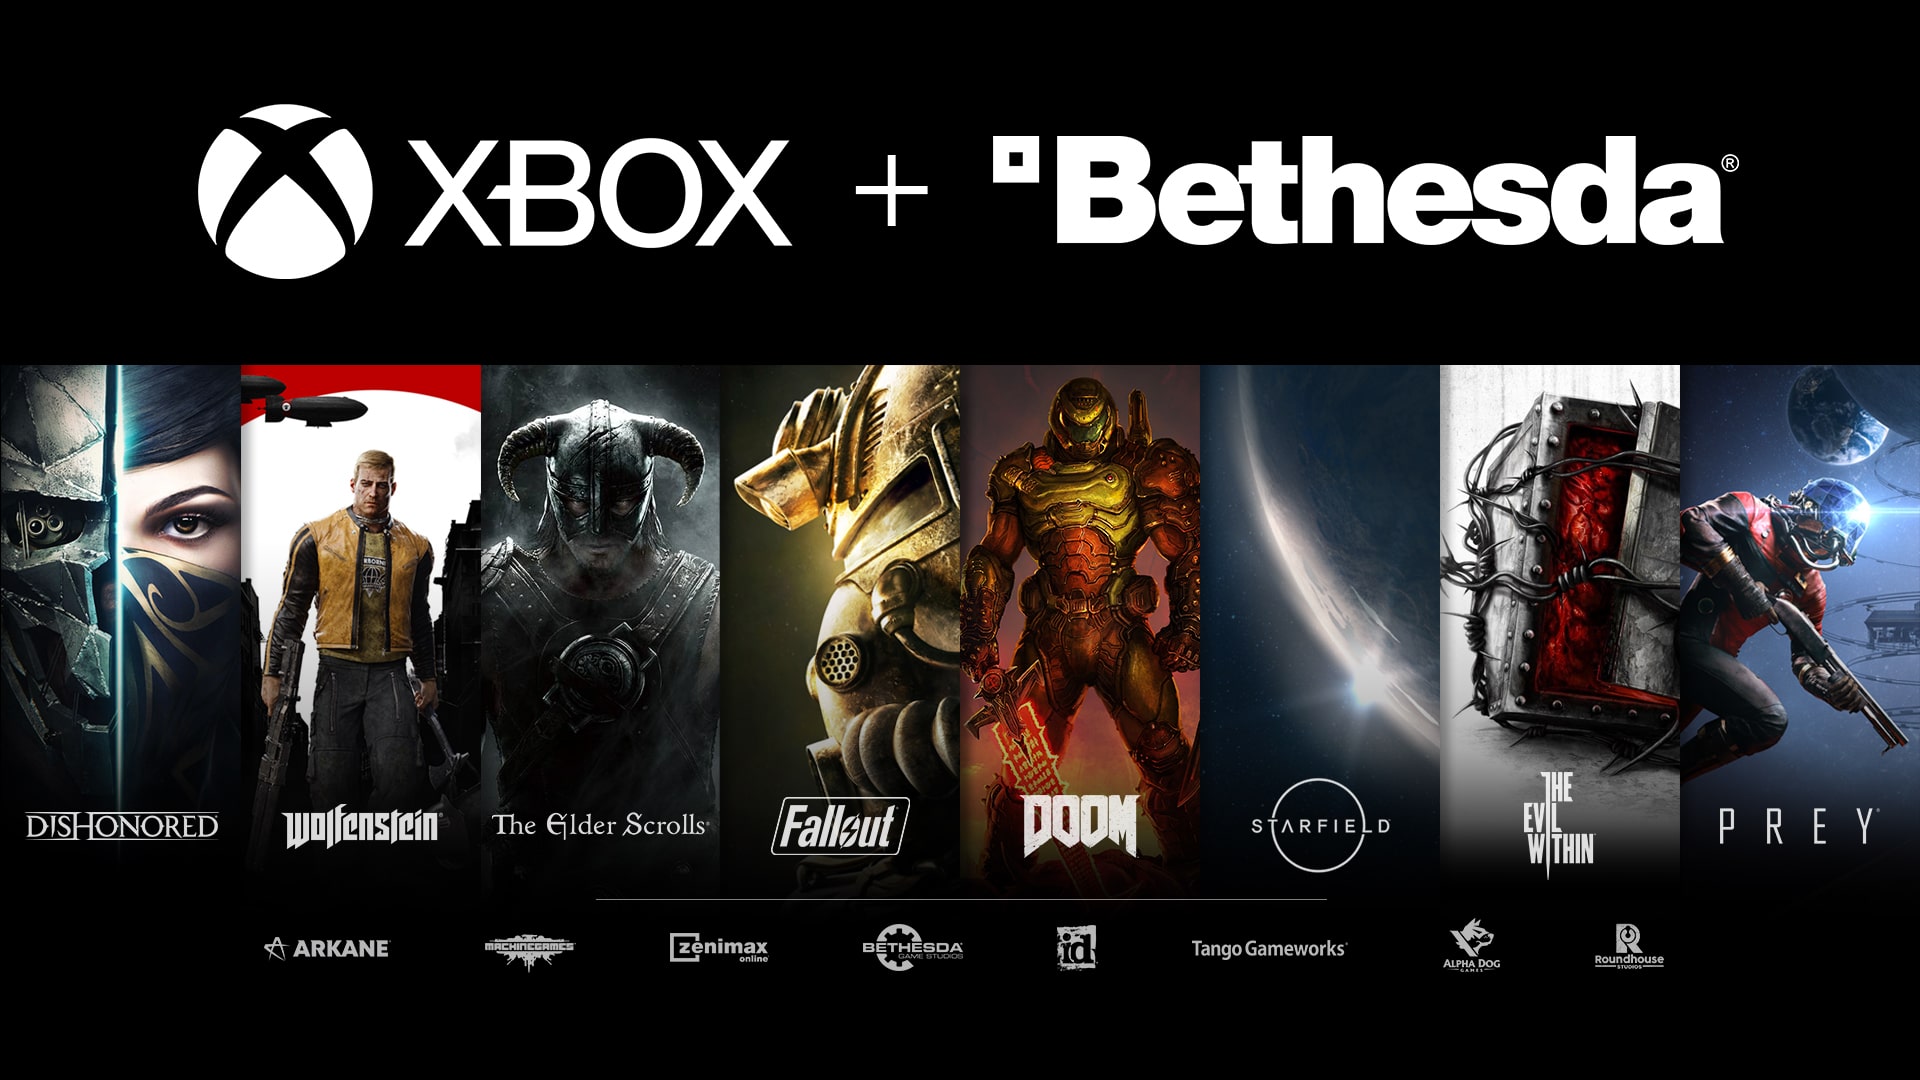 Bethesda games will be exclusive for the Xbox